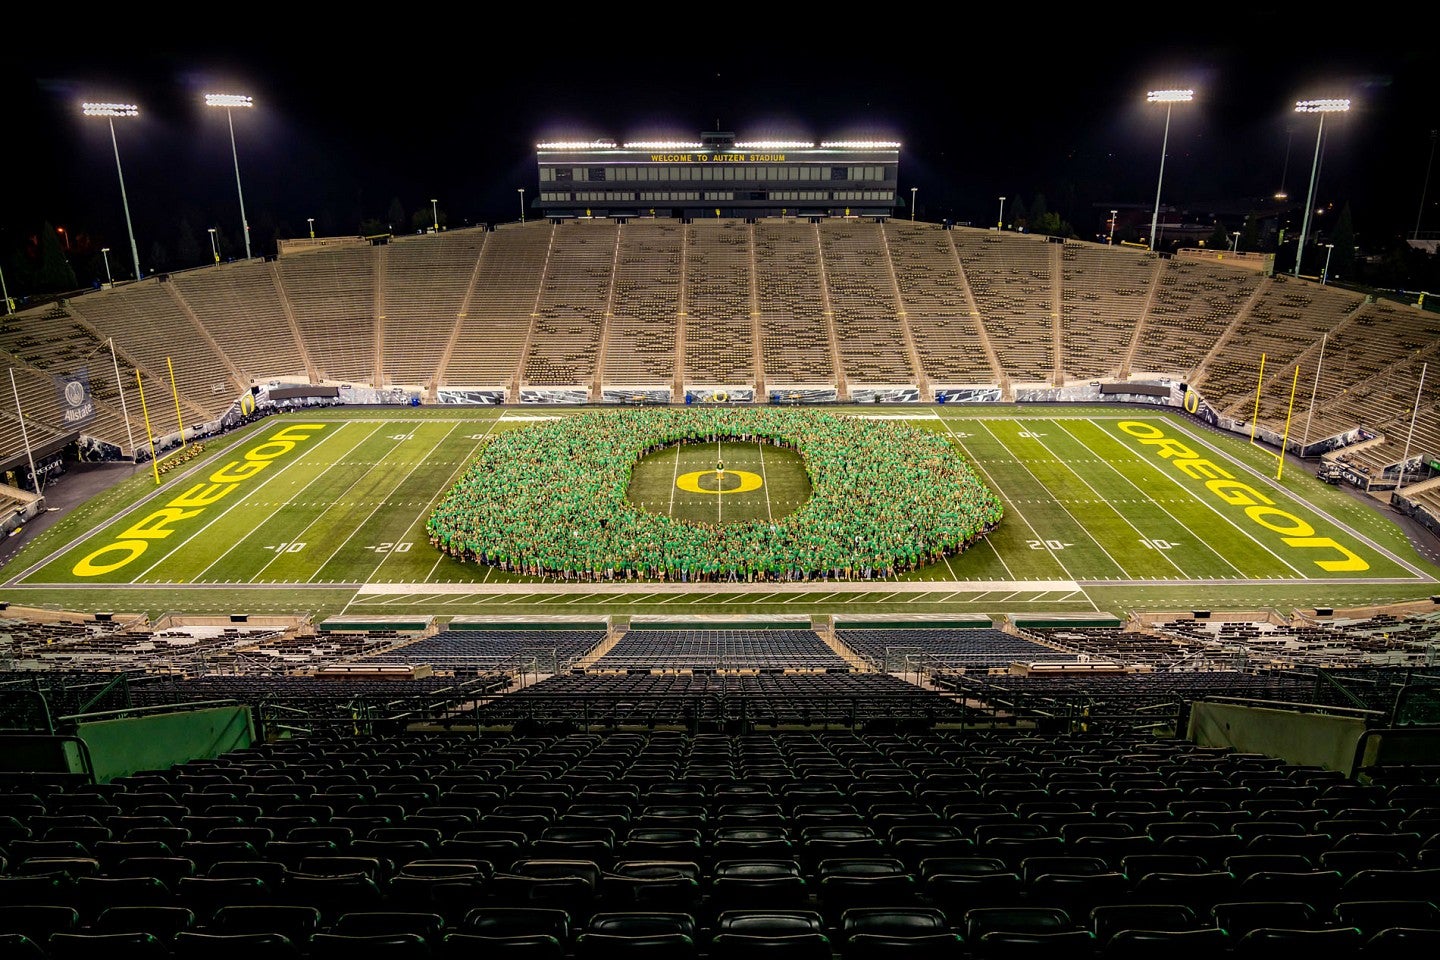 Class of 2026 forming the Oregon "O" in the middle of Autzen Stadium